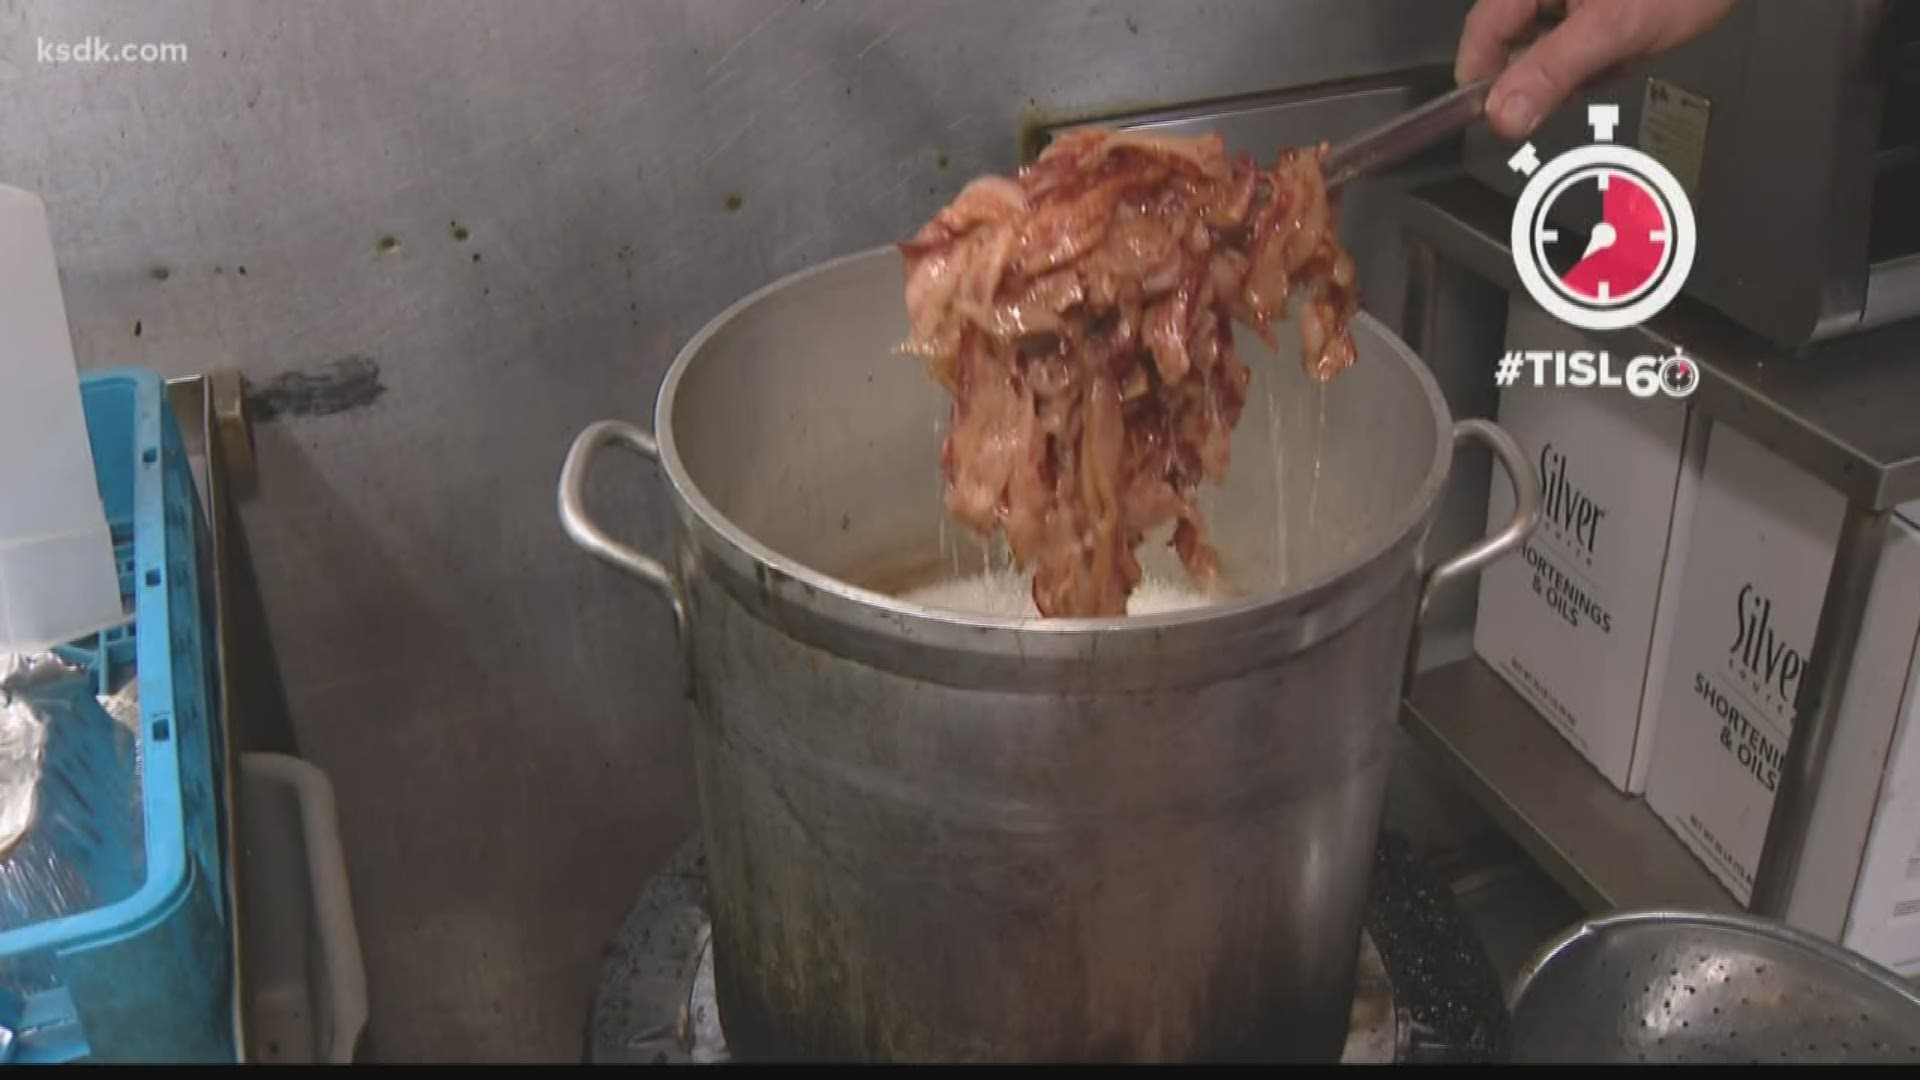 Monday, Dec. 30 is National Bacon Day. To honor the special occasion, Brandon Merano takes us to one of STL’s busiest bacon spots.